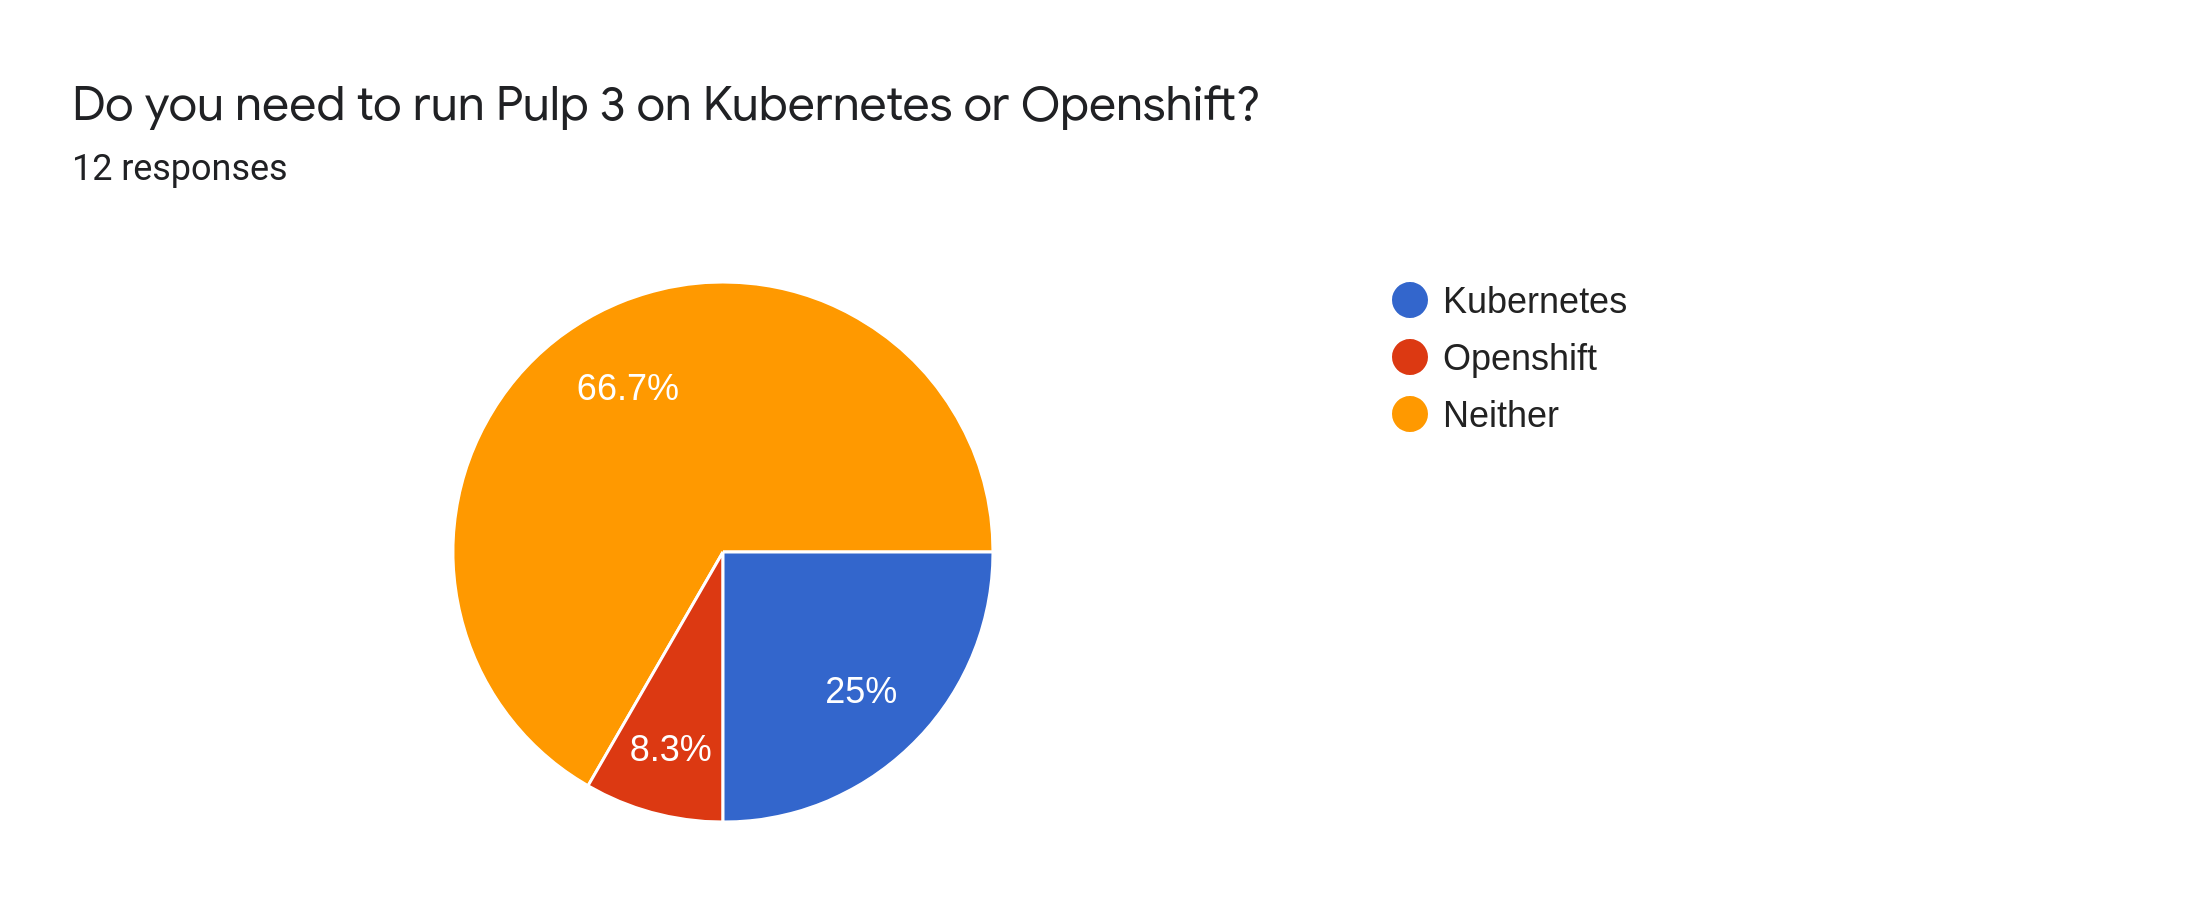 Do you need to run Pulp 3 on Kubernetes or Openshift?